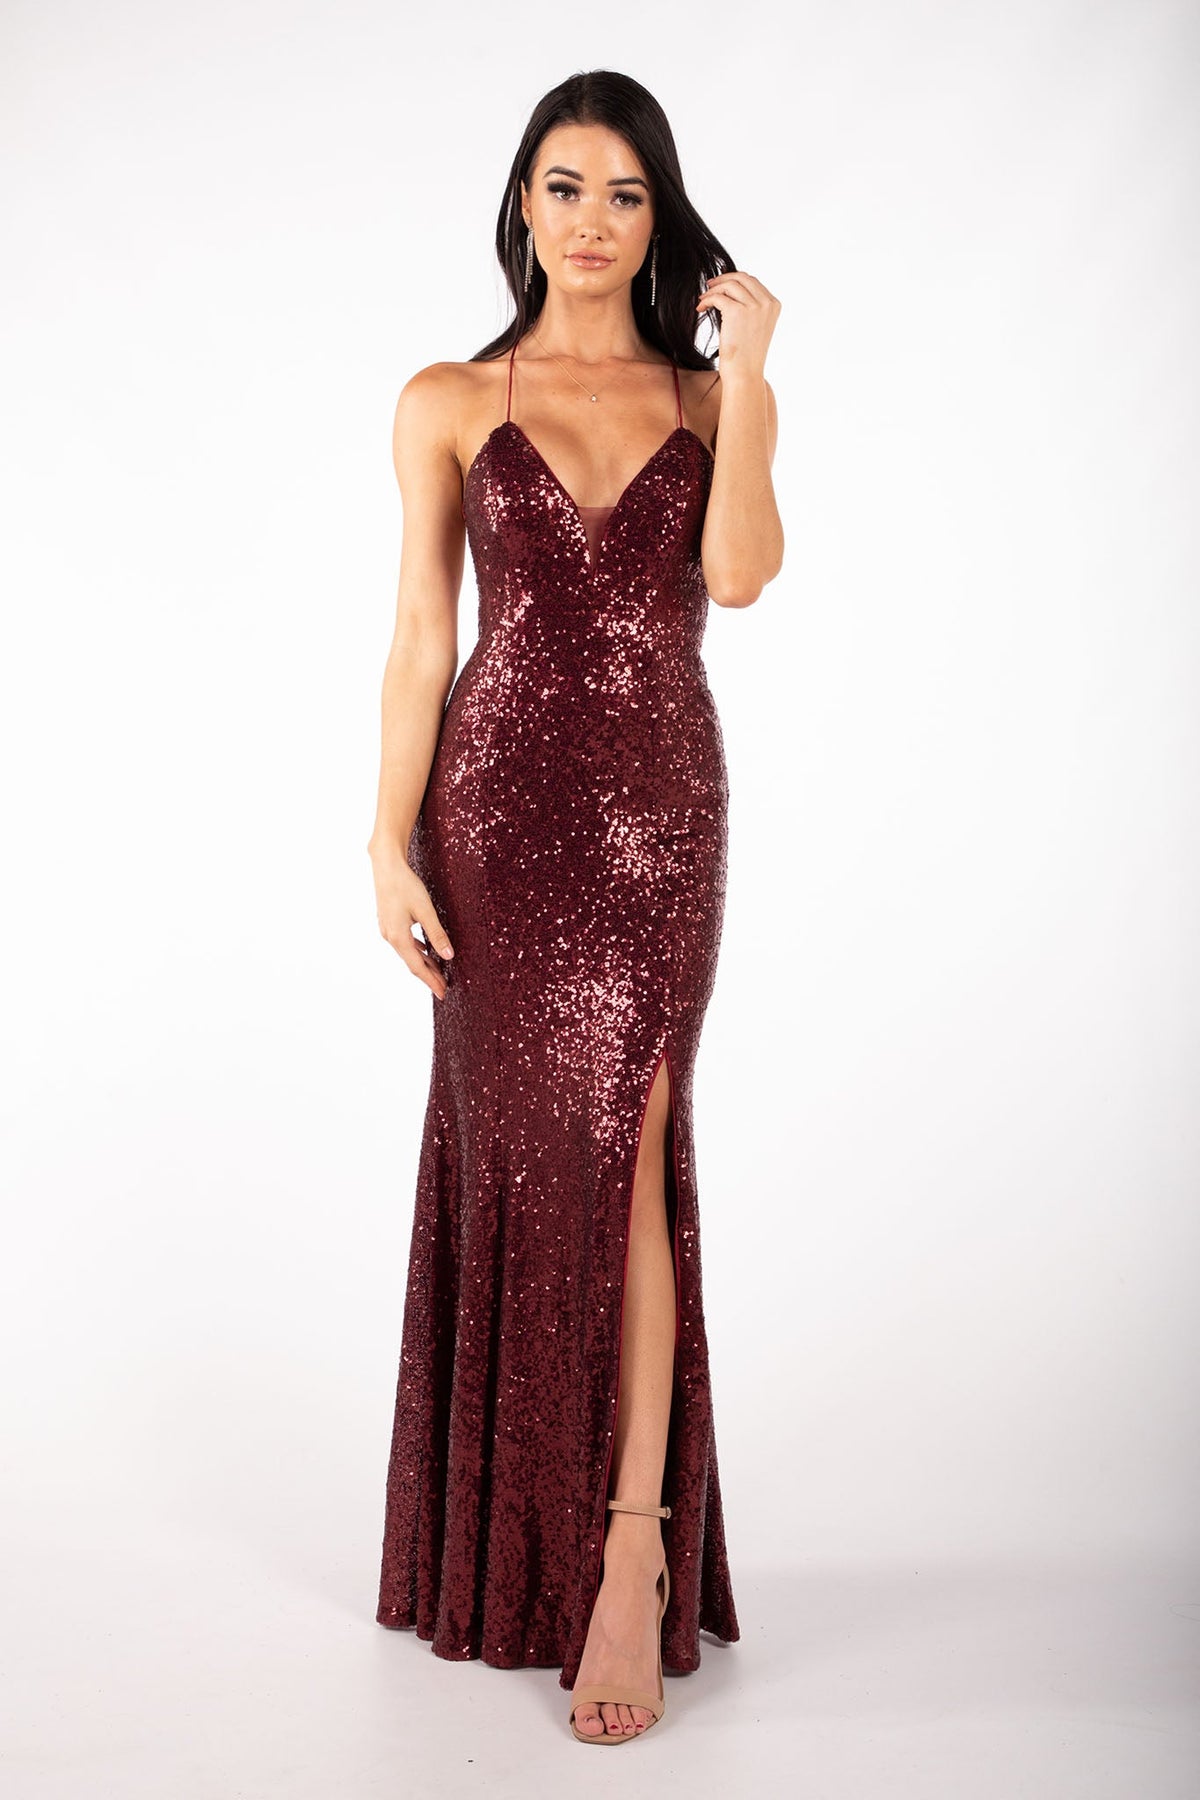 Burgundy Sequin Maxi Evening Gown featuring V Neckline with Mesh Insert, Side Split, Lace Up Open Back and No Train